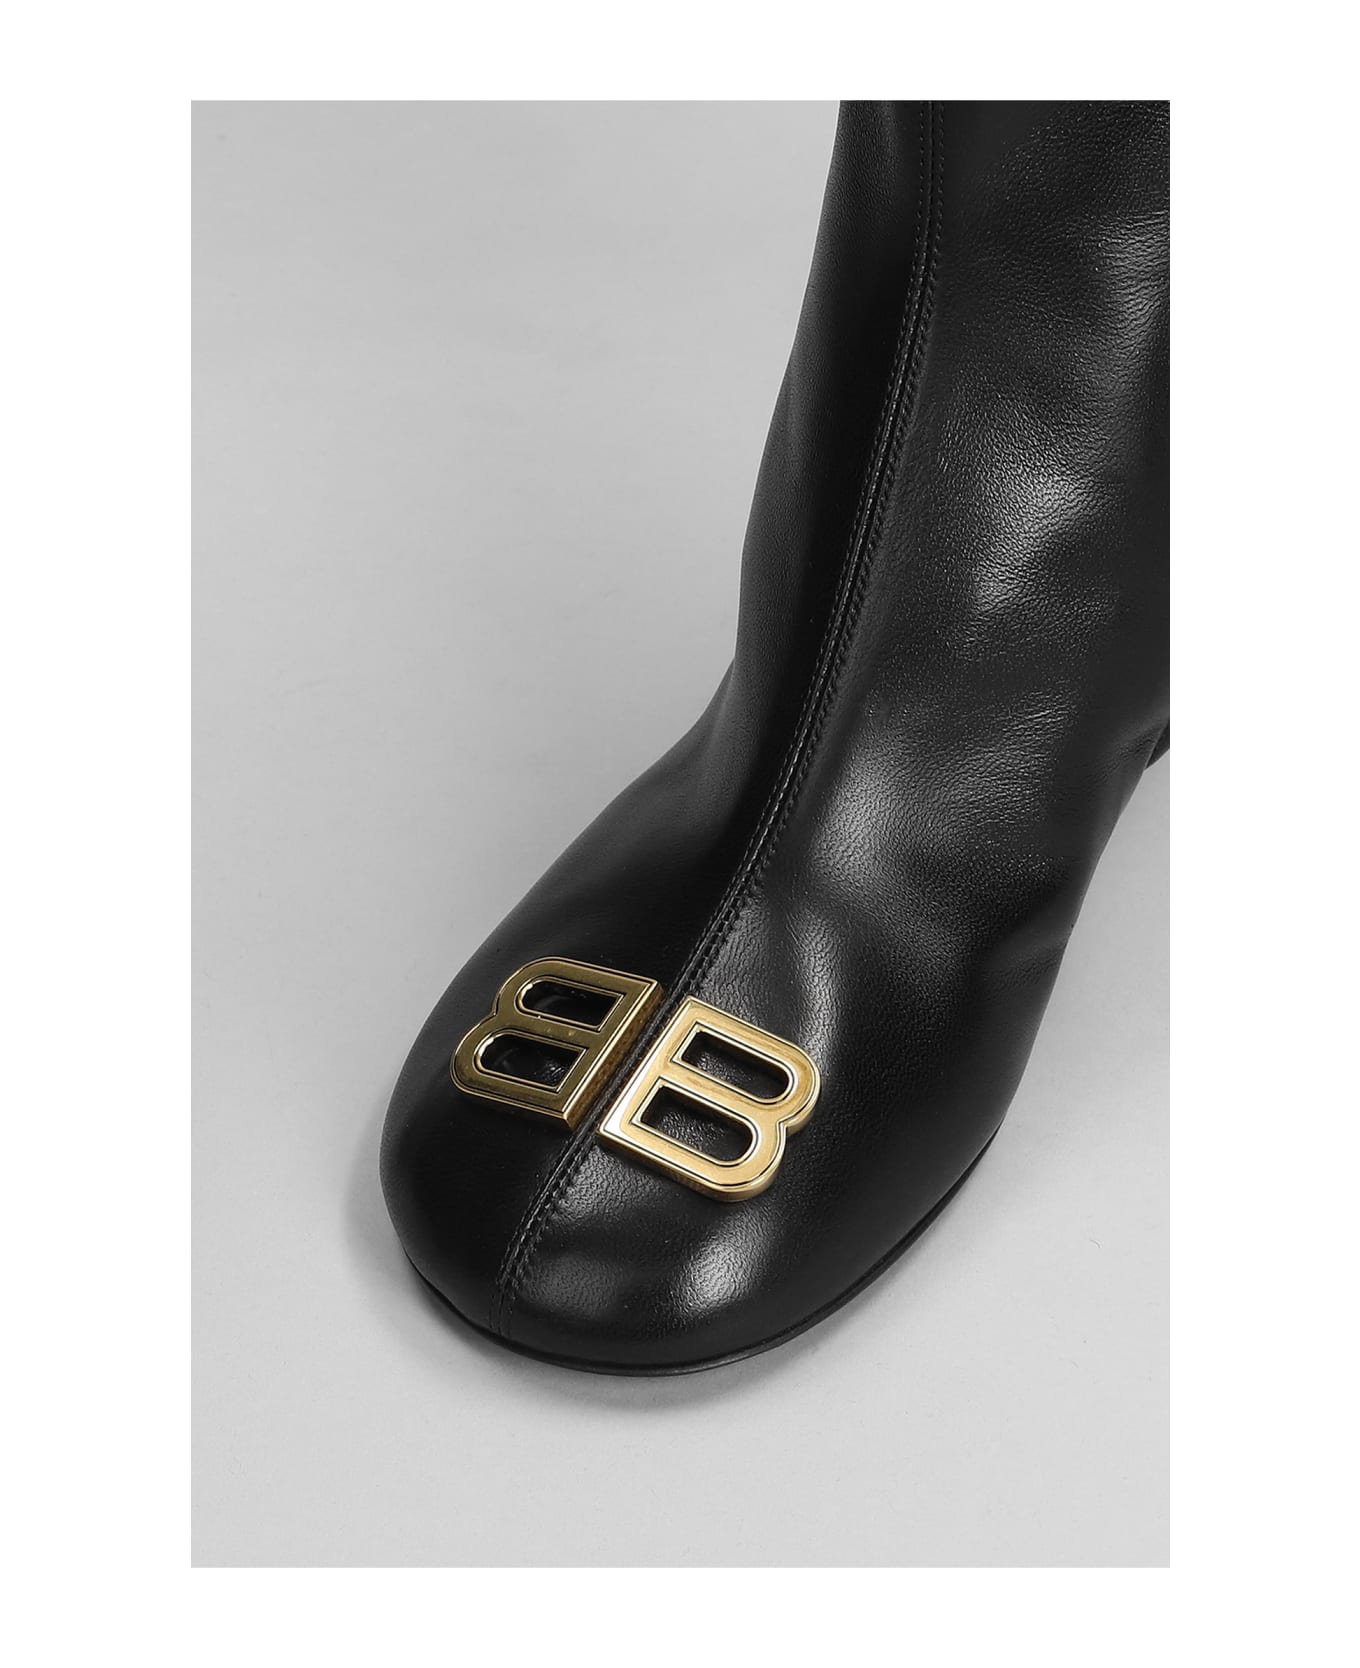 Balenciaga High Heels Ankle Boots In Black Leather - black ブーツ